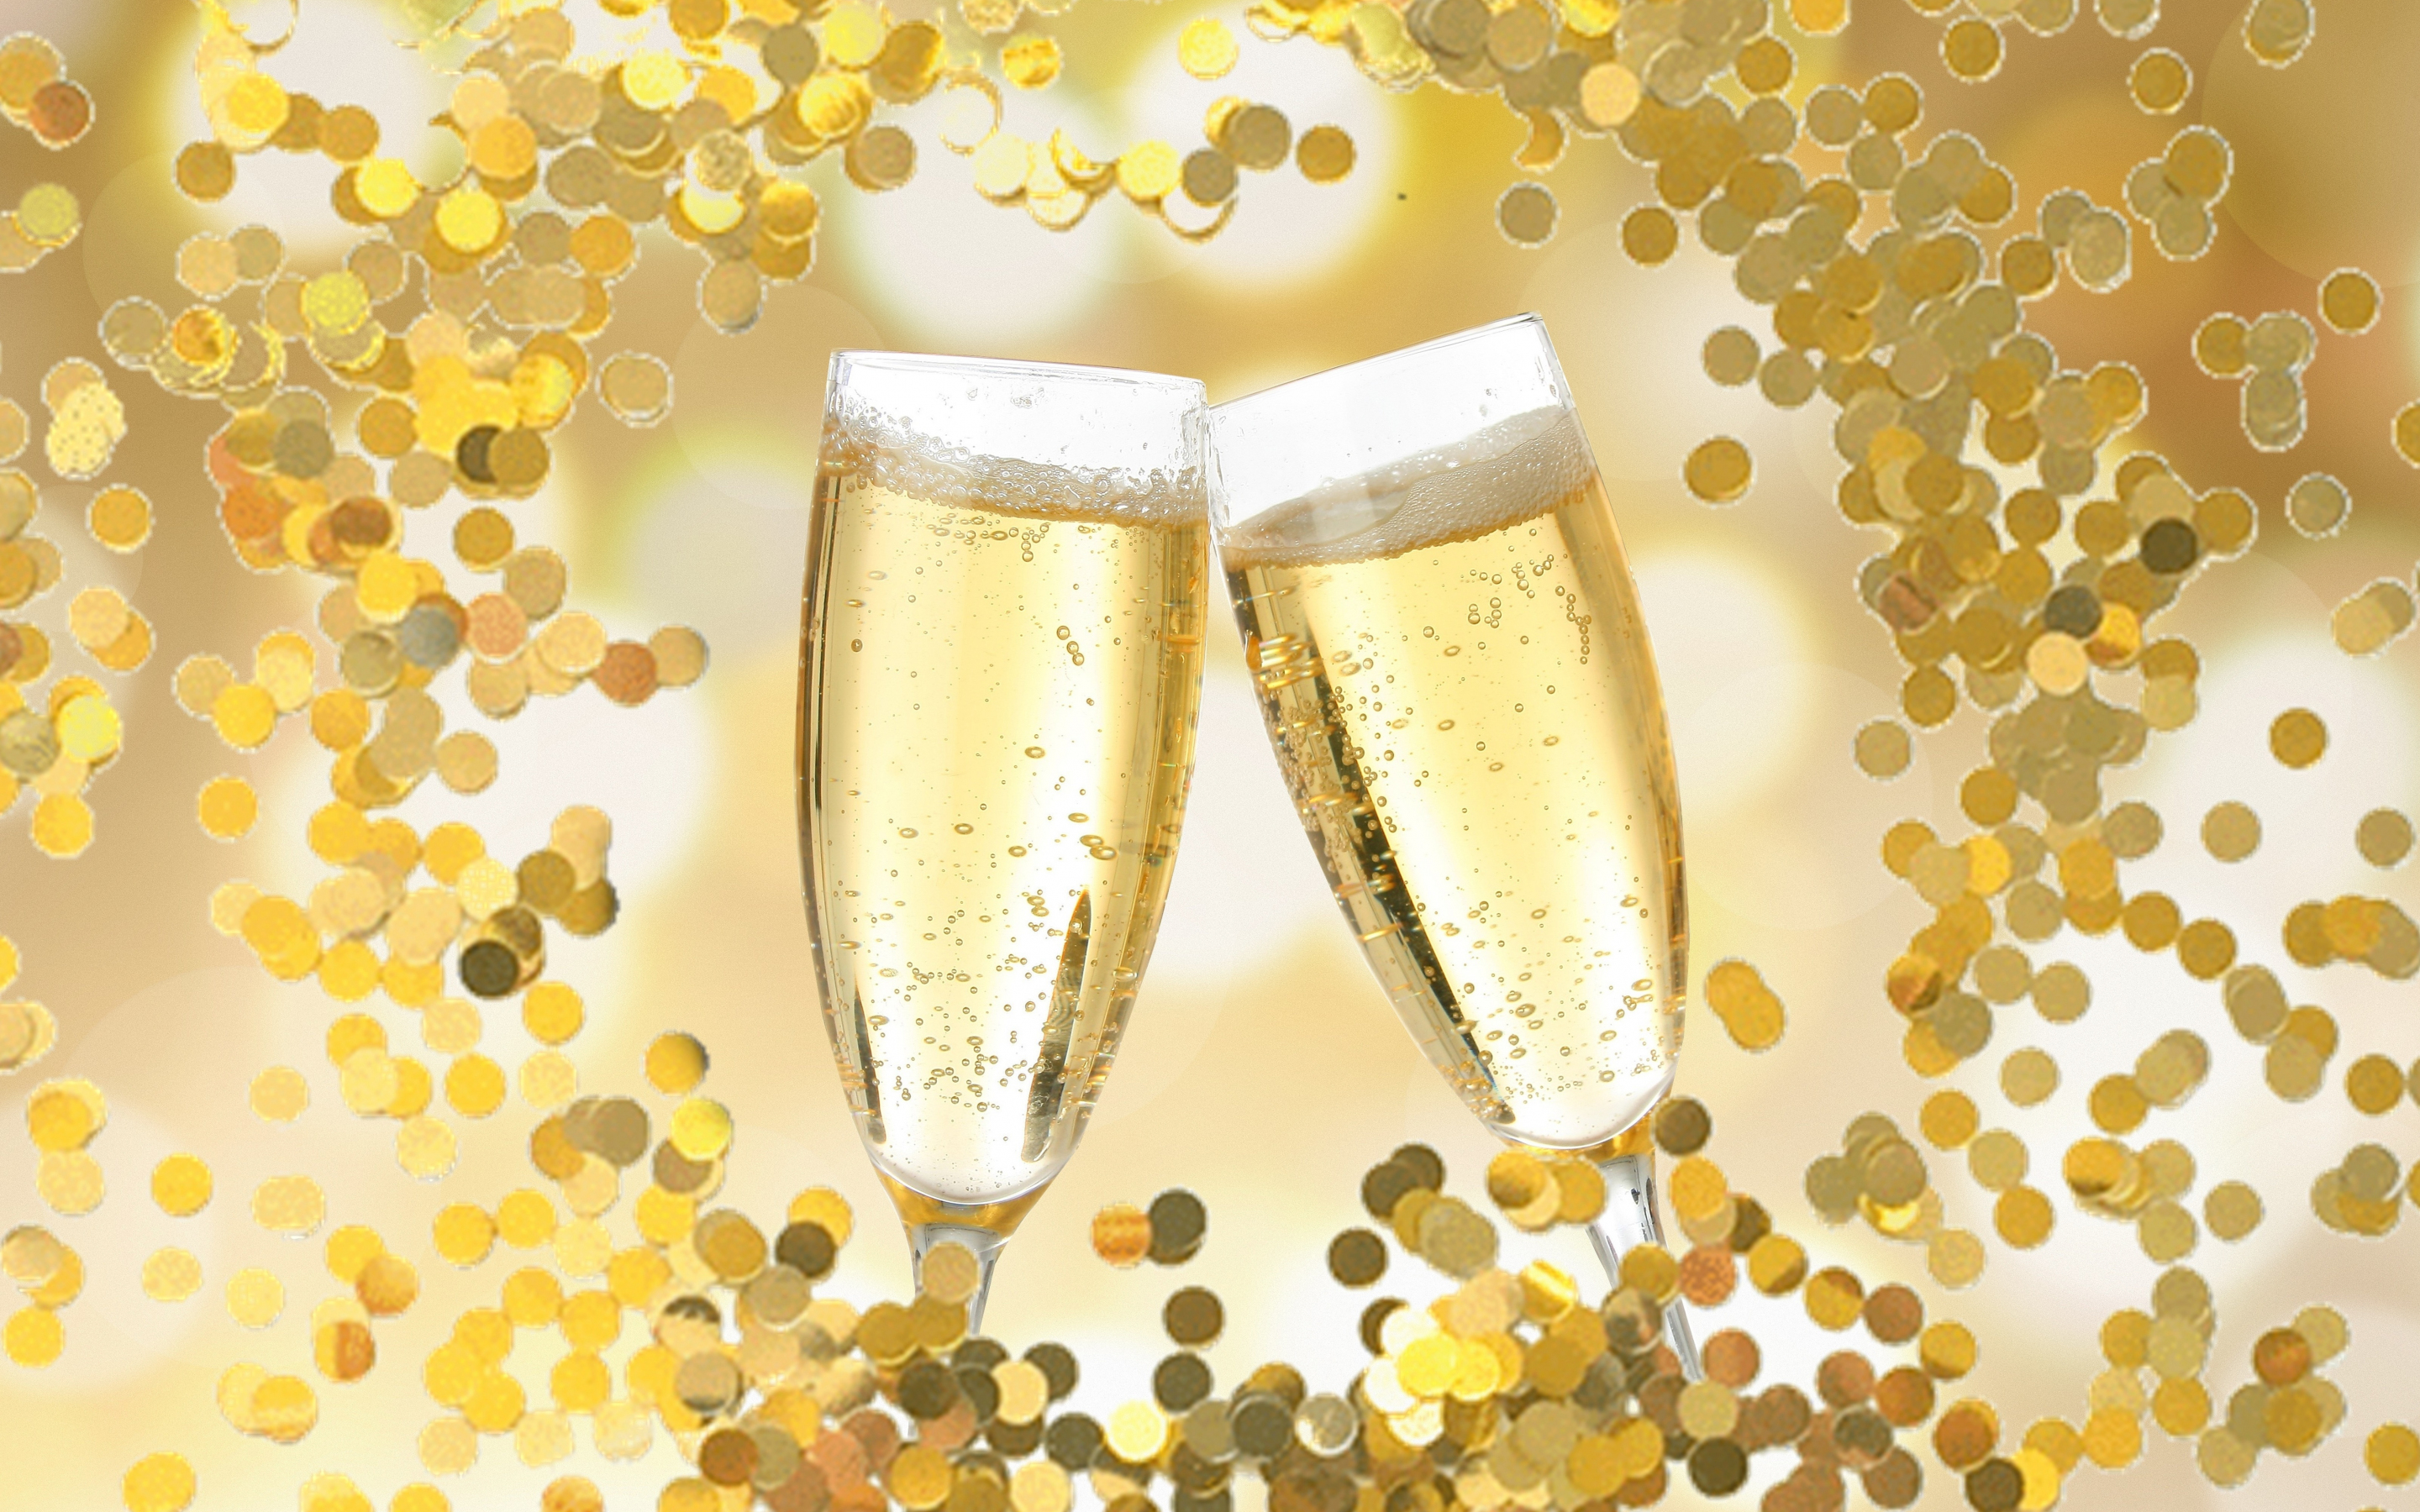 Champagne glasses, new year, celebration, abstract, 2880x1800 wallpaper